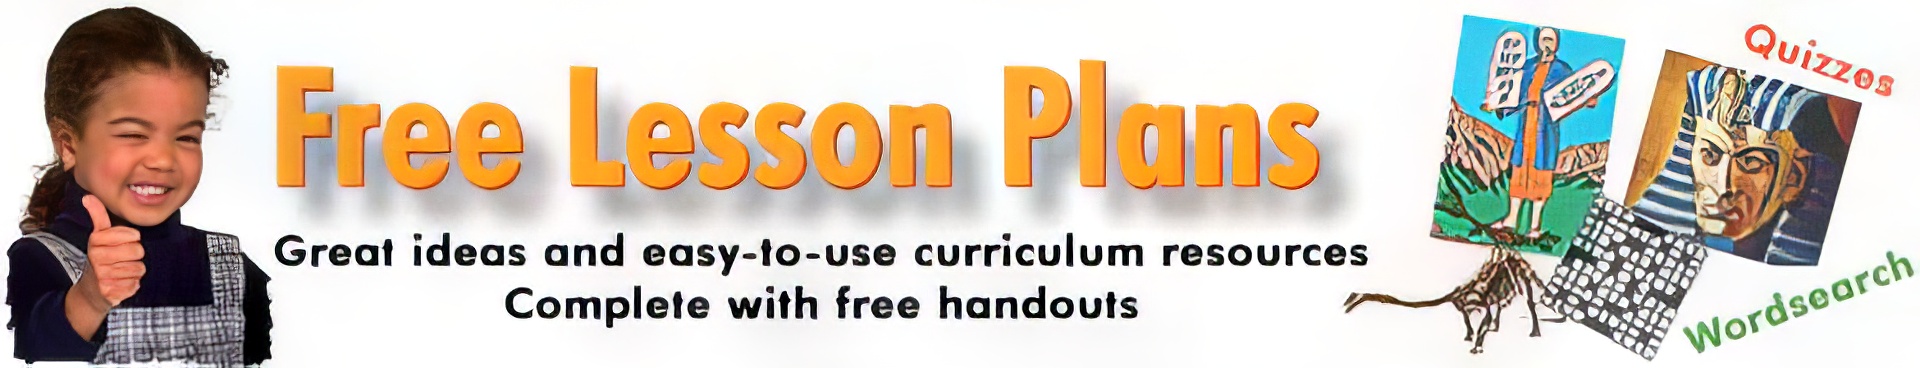 Free Lesson Plans - Copyright ChristianAnswers.Net